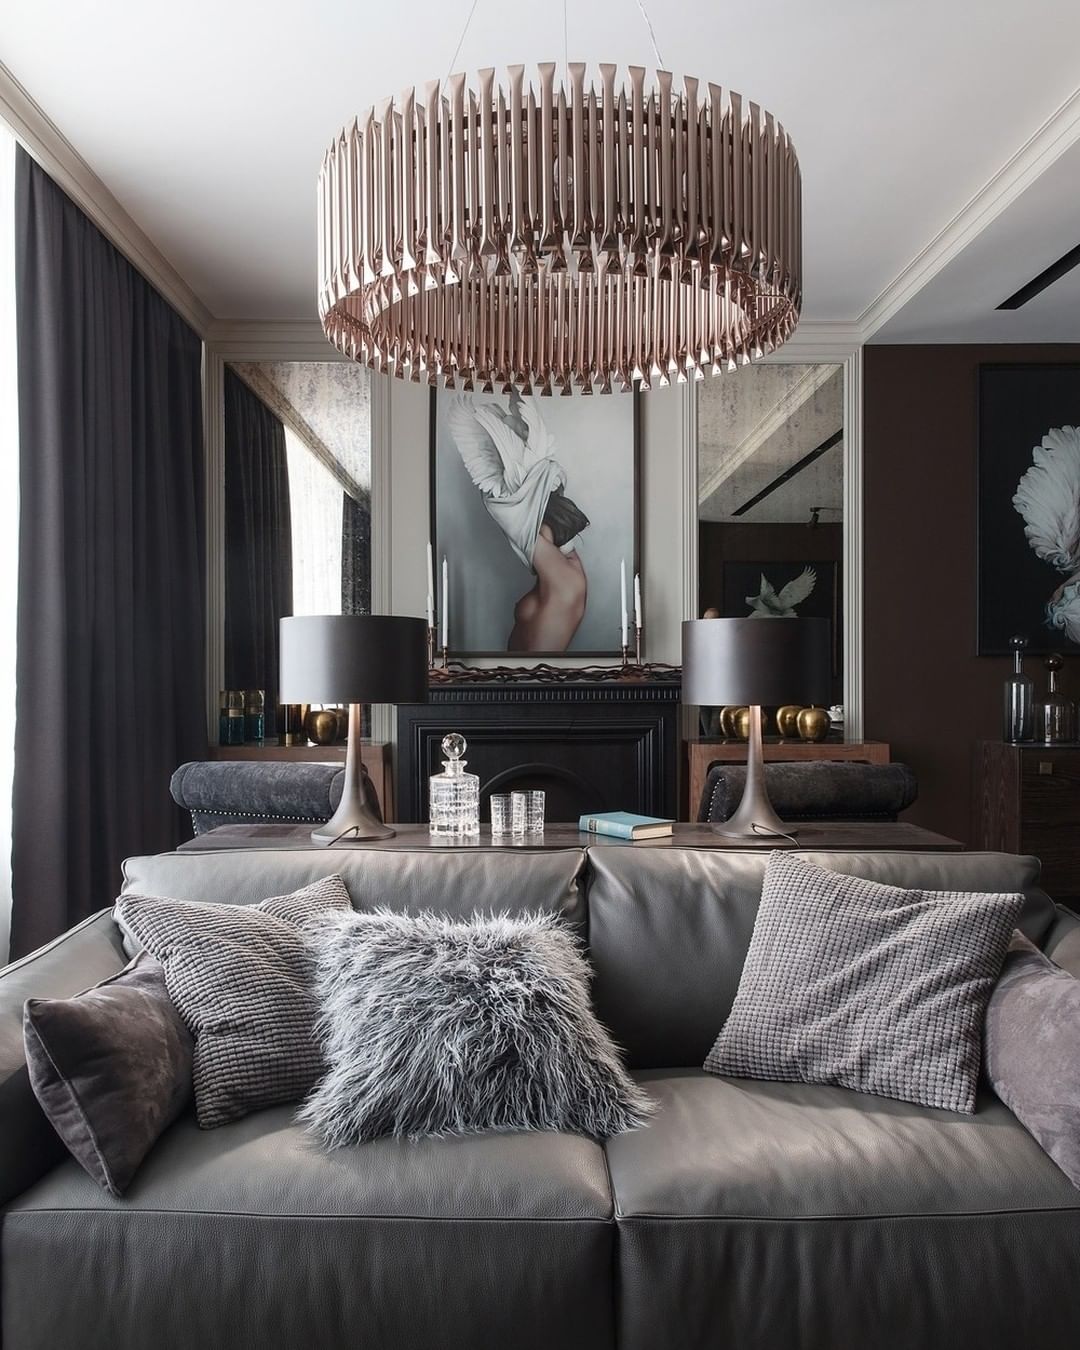 Find The Inspiration For Your Interior Design With These Gorgeous Ambiances